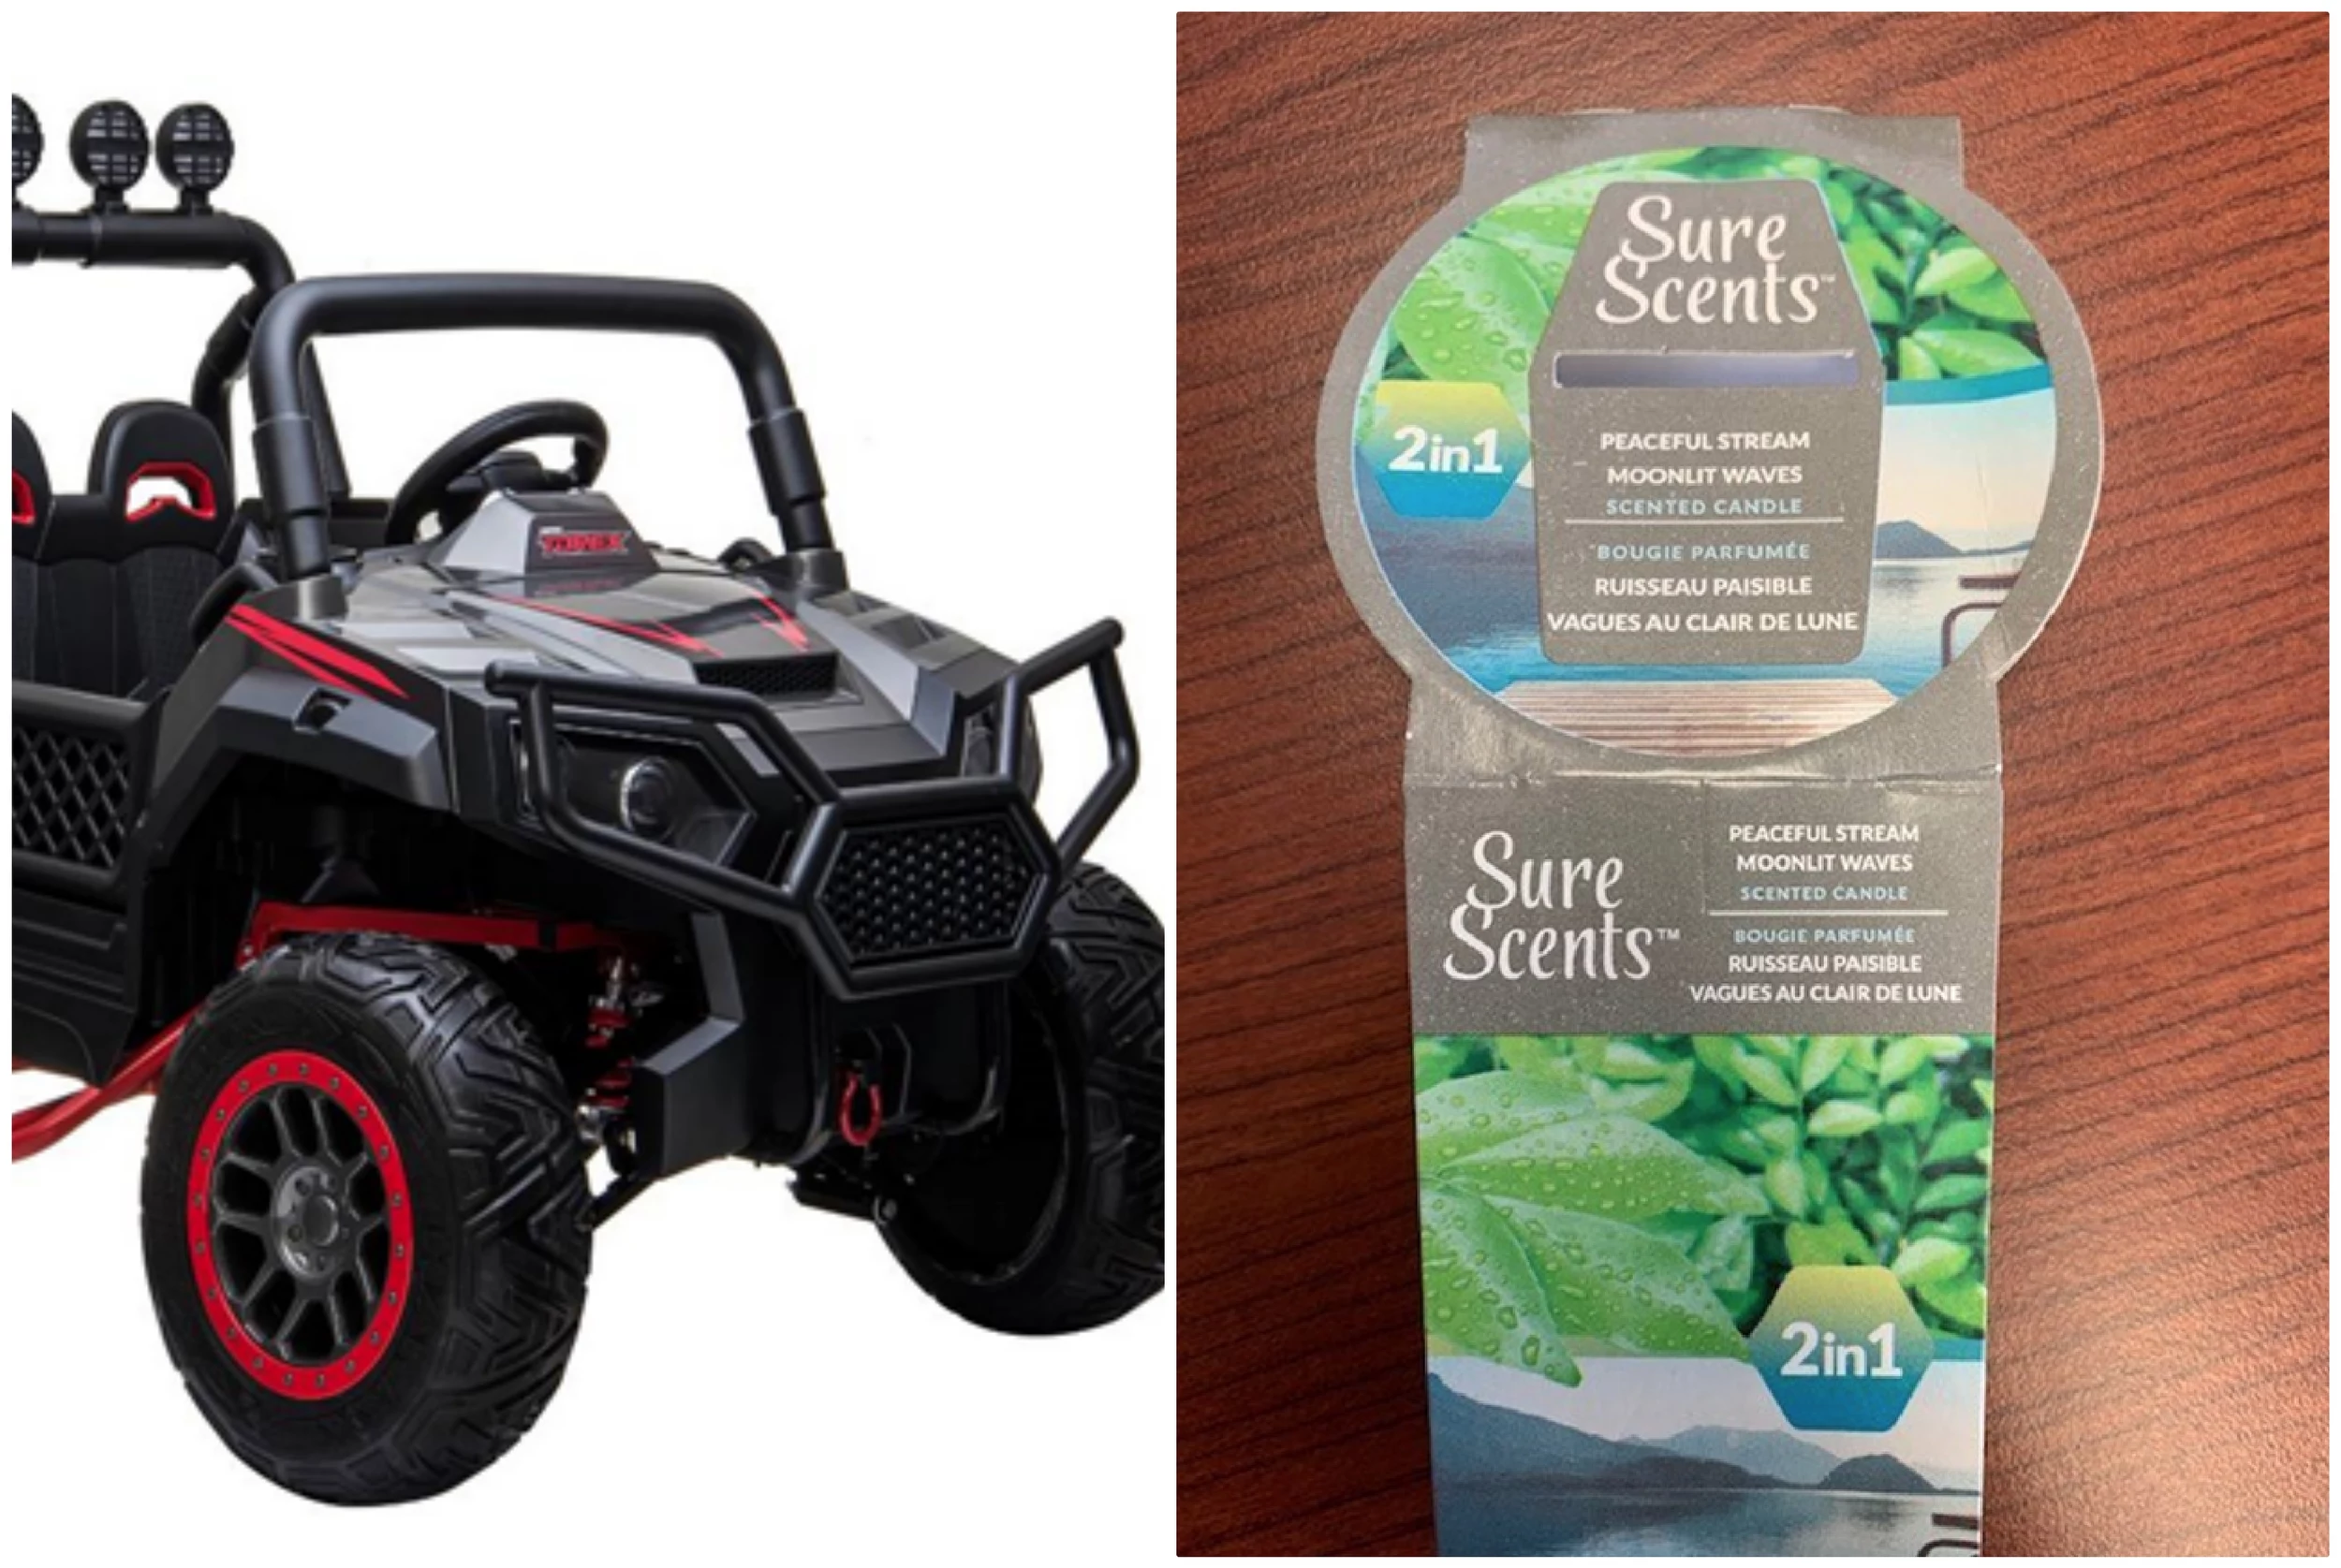 Dollar Tree and Walmart Recall Candles and Toy UTV's Over Safety